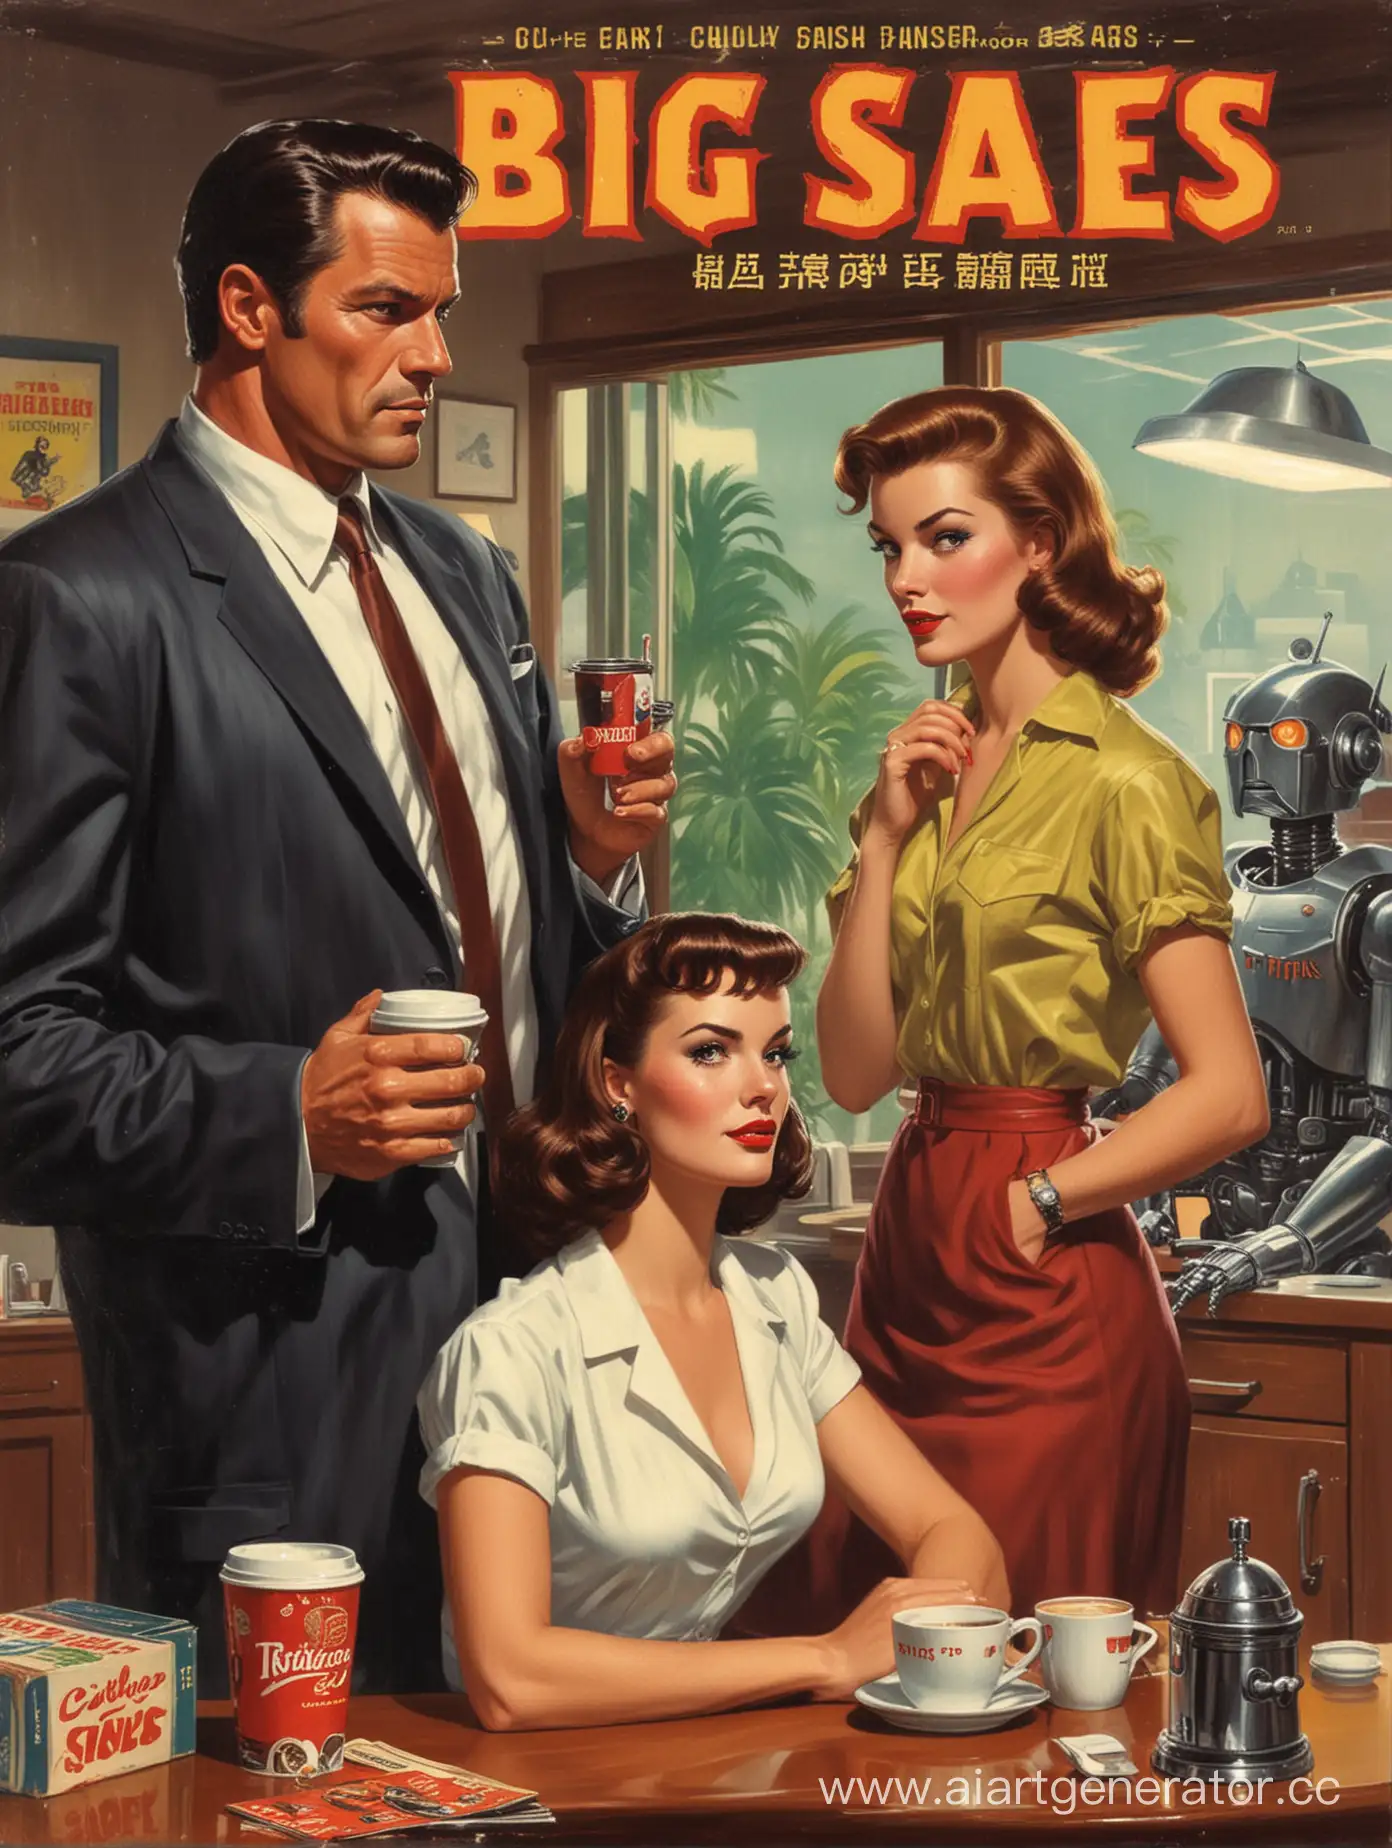 Create a 1950's lurid pulp fiction book cover with 2 men and a beautiful brunette drinking coffee
The title of the book is "Big Sales Robot"